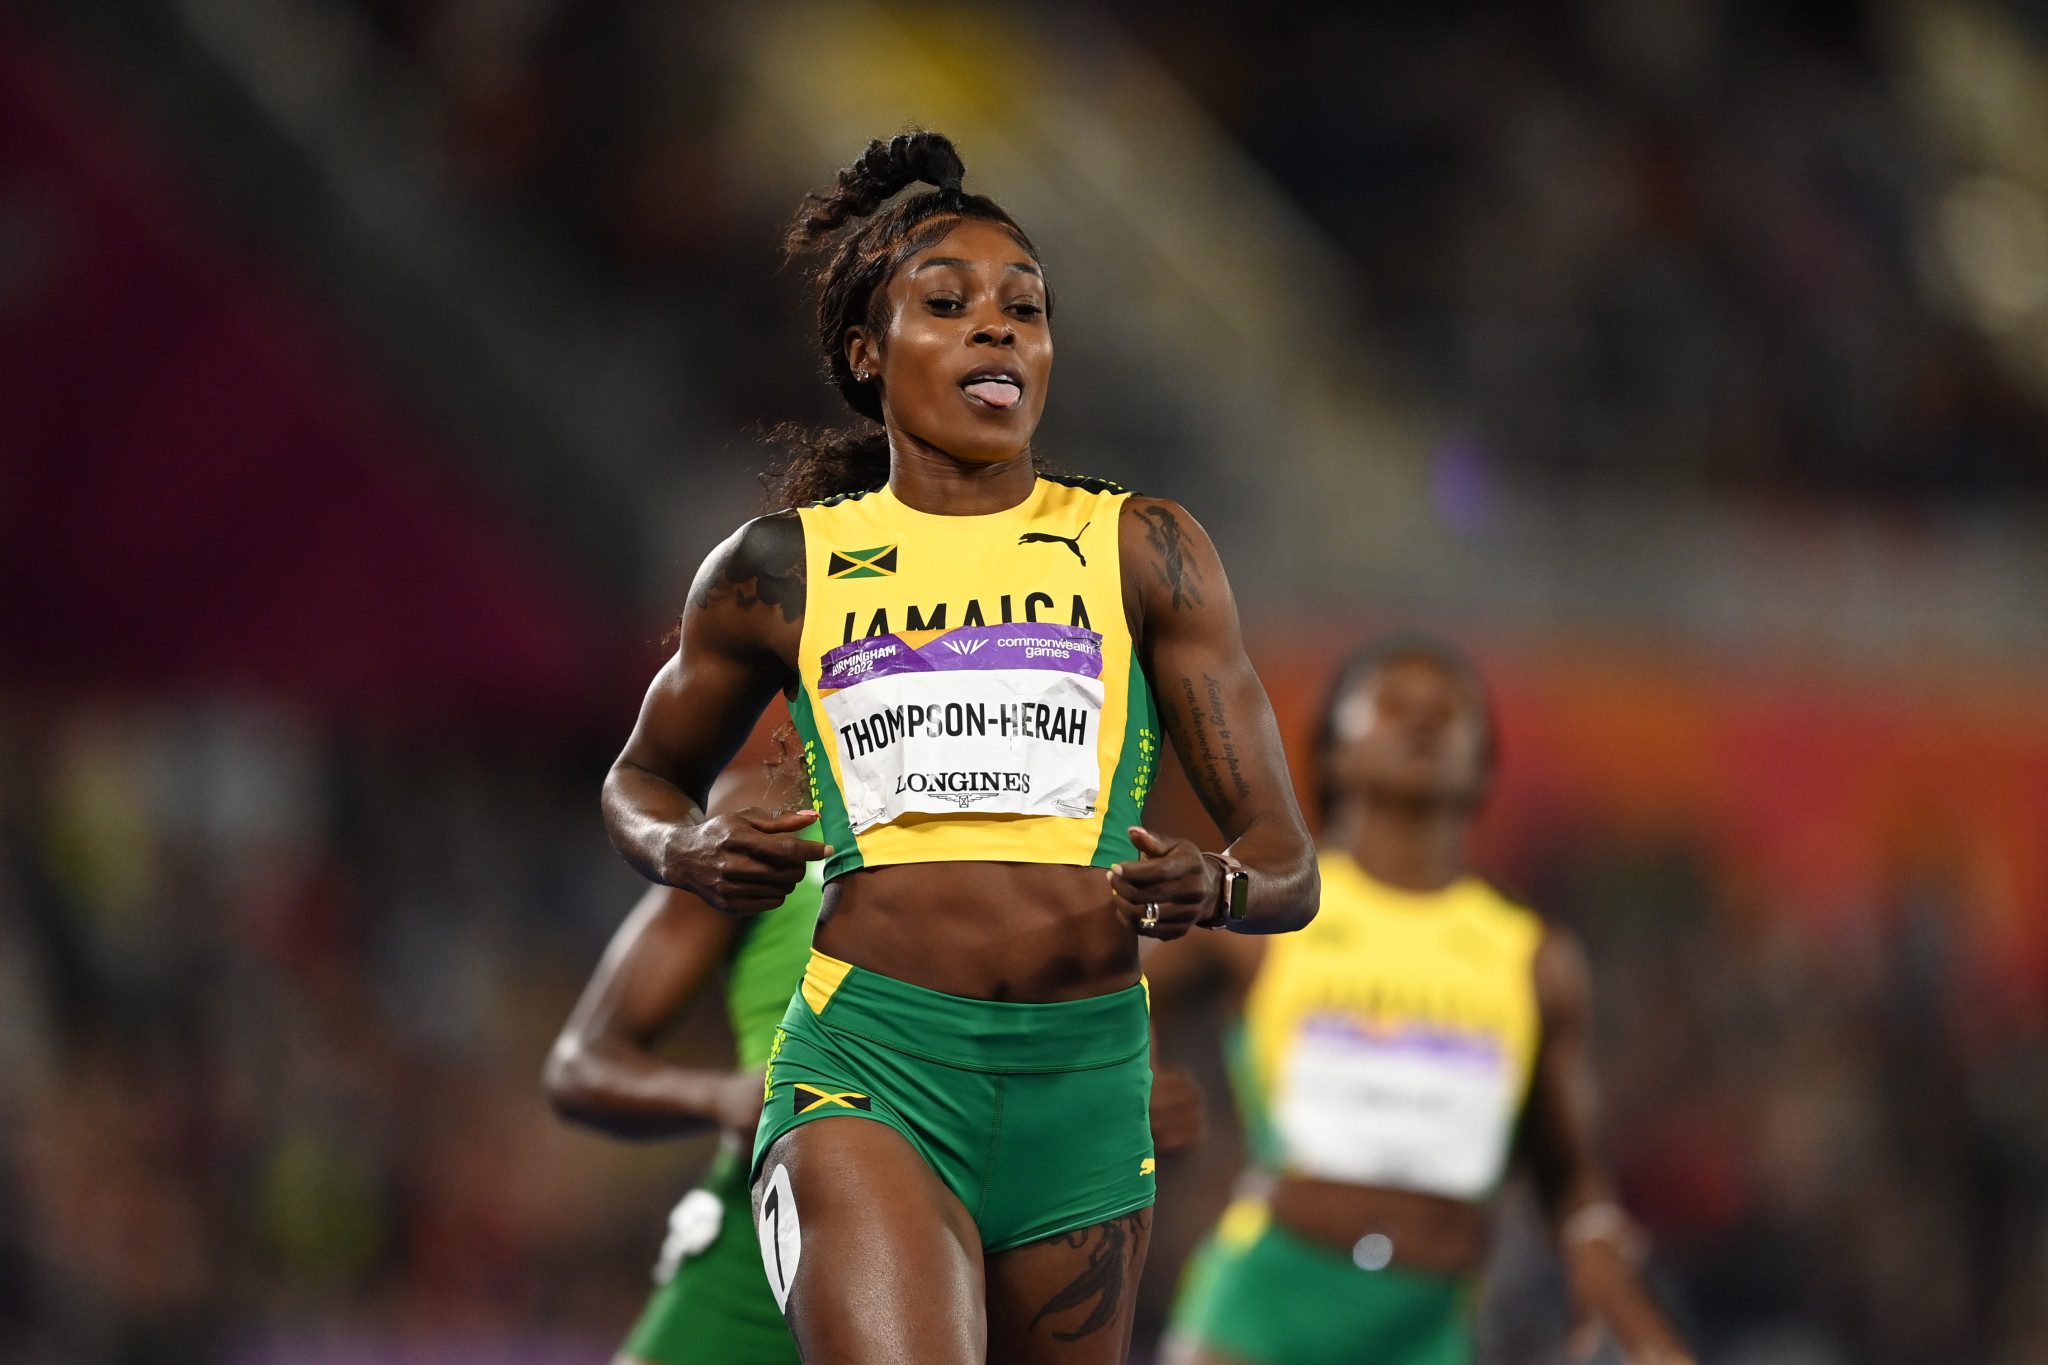 Elaine Thompson-Herah will not defend her 200m title at the upcoming Paris Olympic Games. GETTY IMAGES